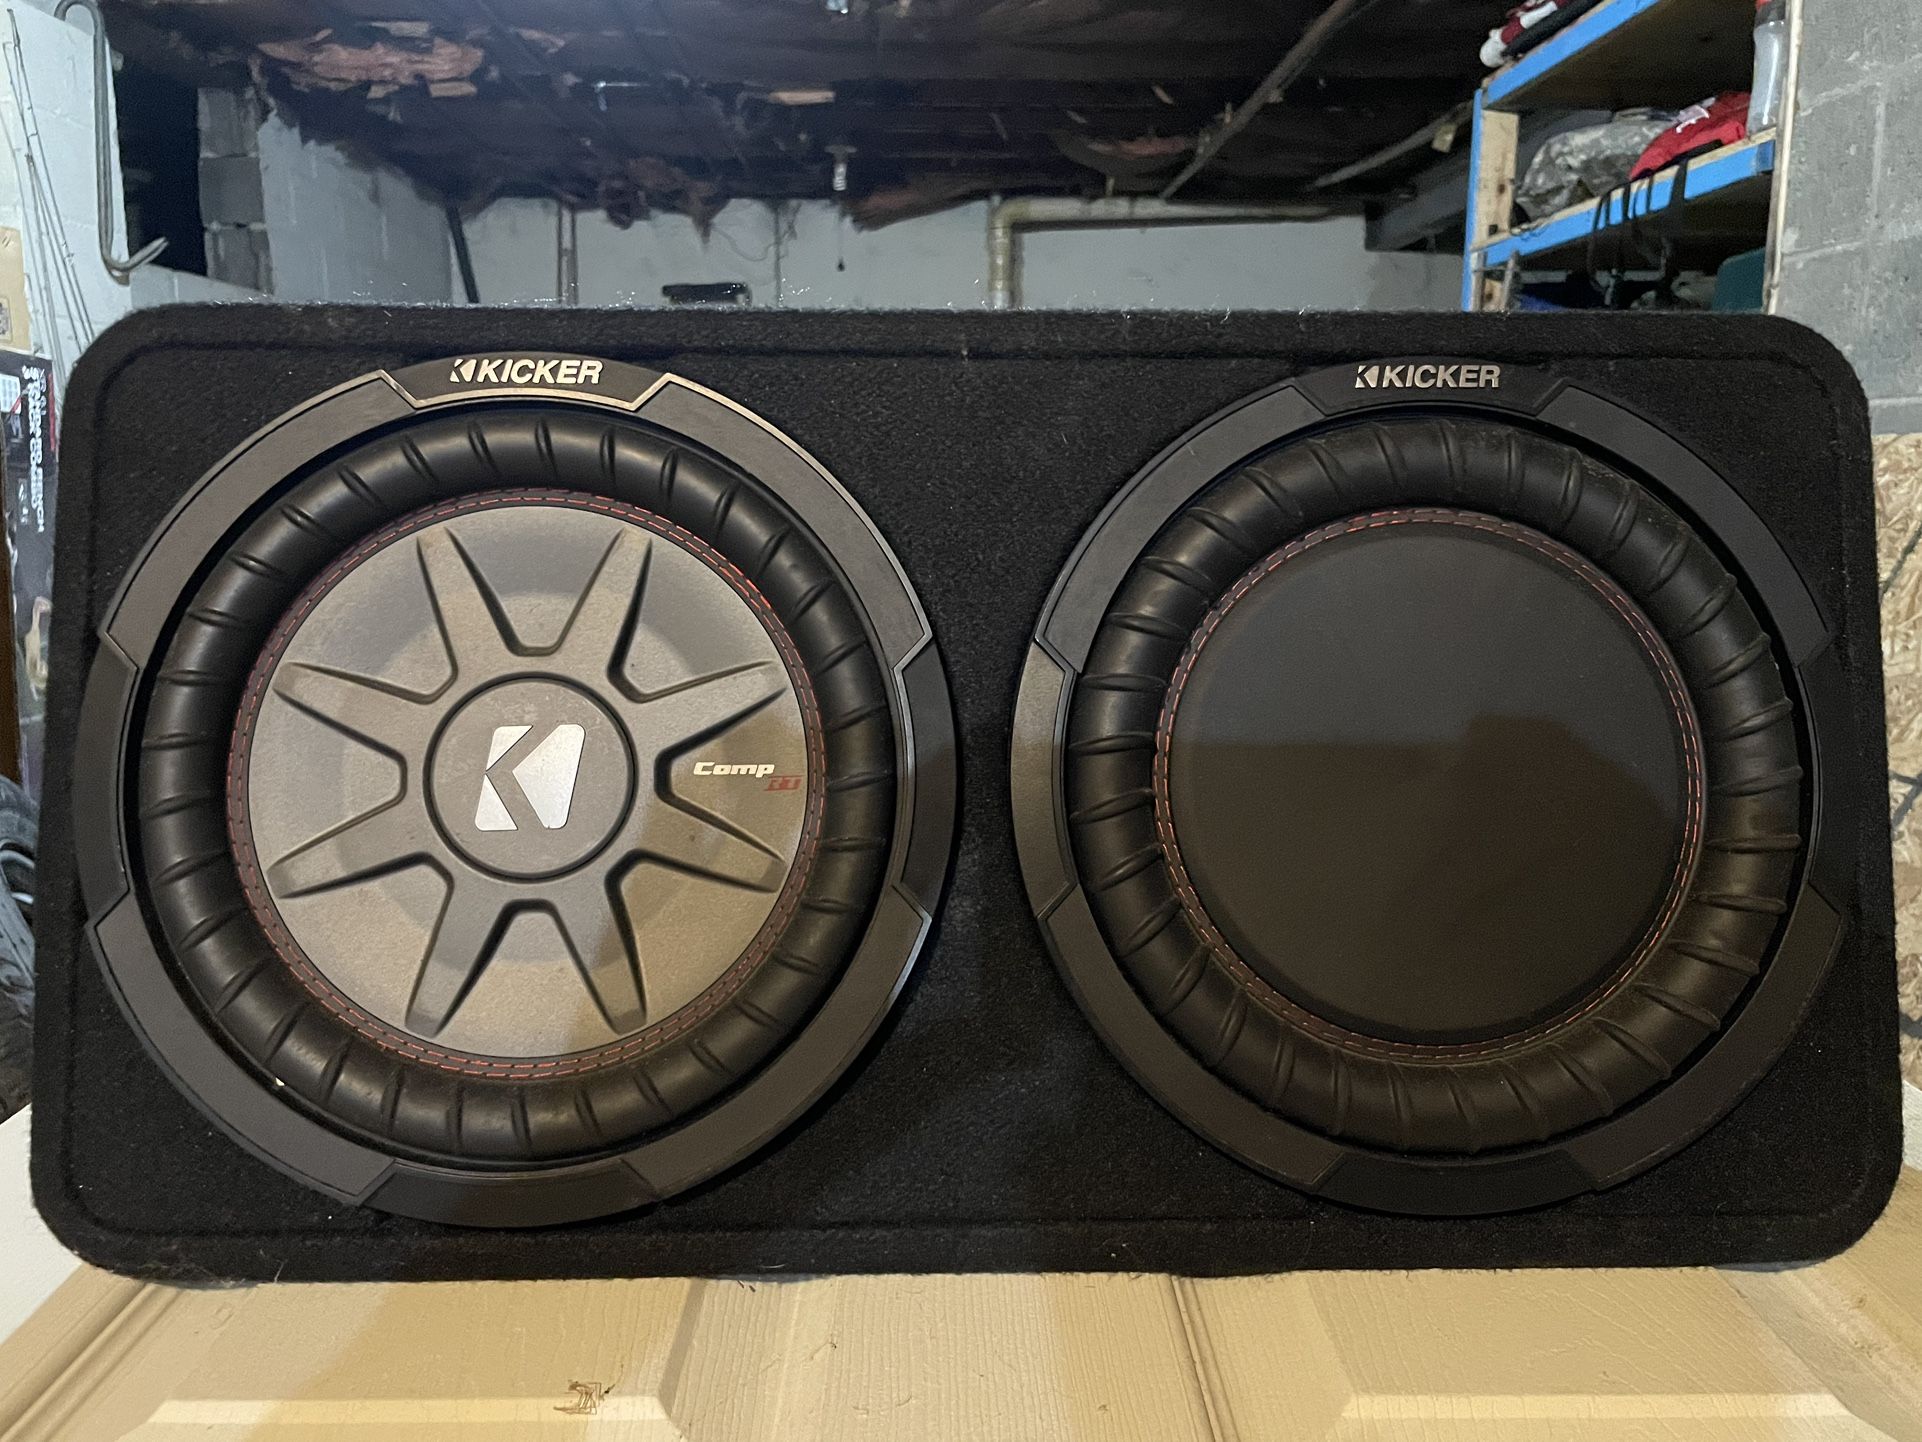 10” Kicker CompRT 2-ohm subwoofer and passive radiator